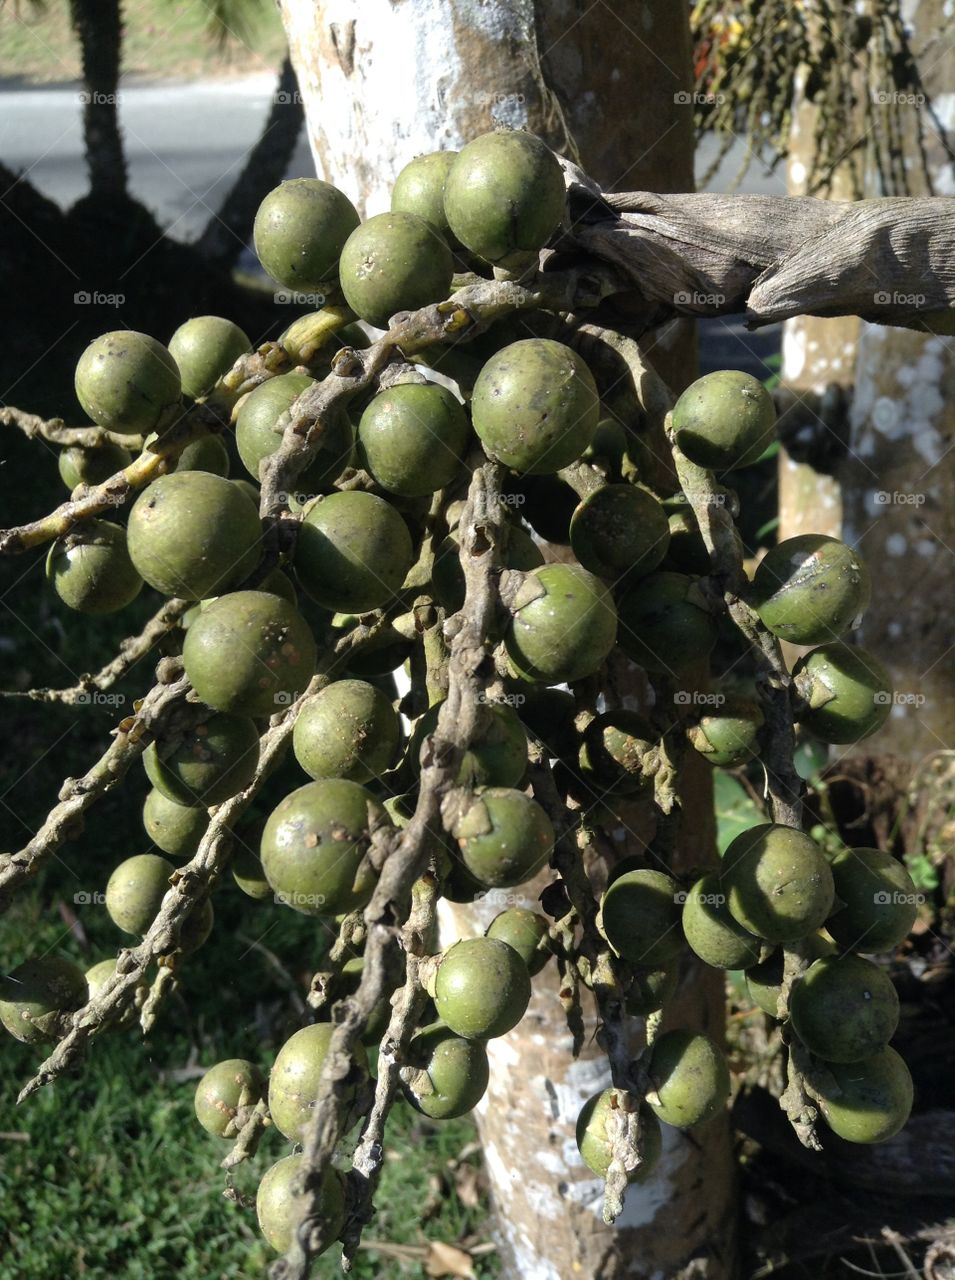 Olive green seeds/fruits on a tropical tree. 